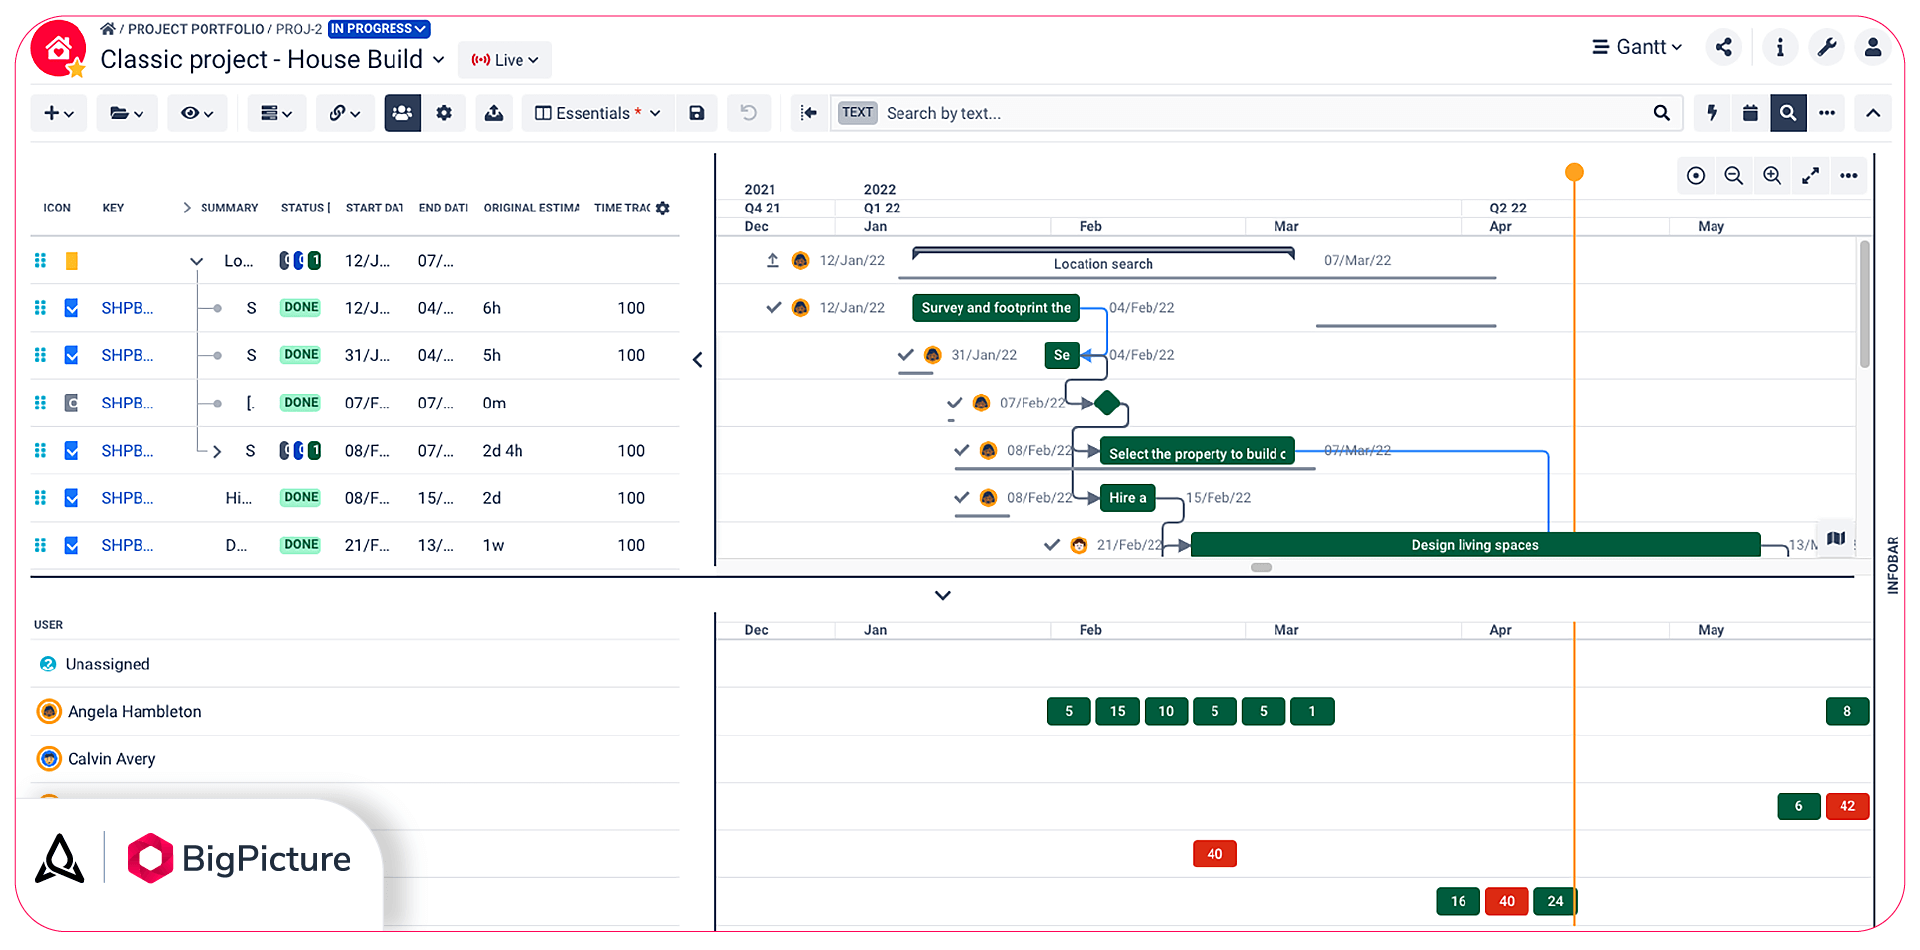 A screenshot of a Gantt Chart in BigPicture which can serve as a roadmap of a classic project.